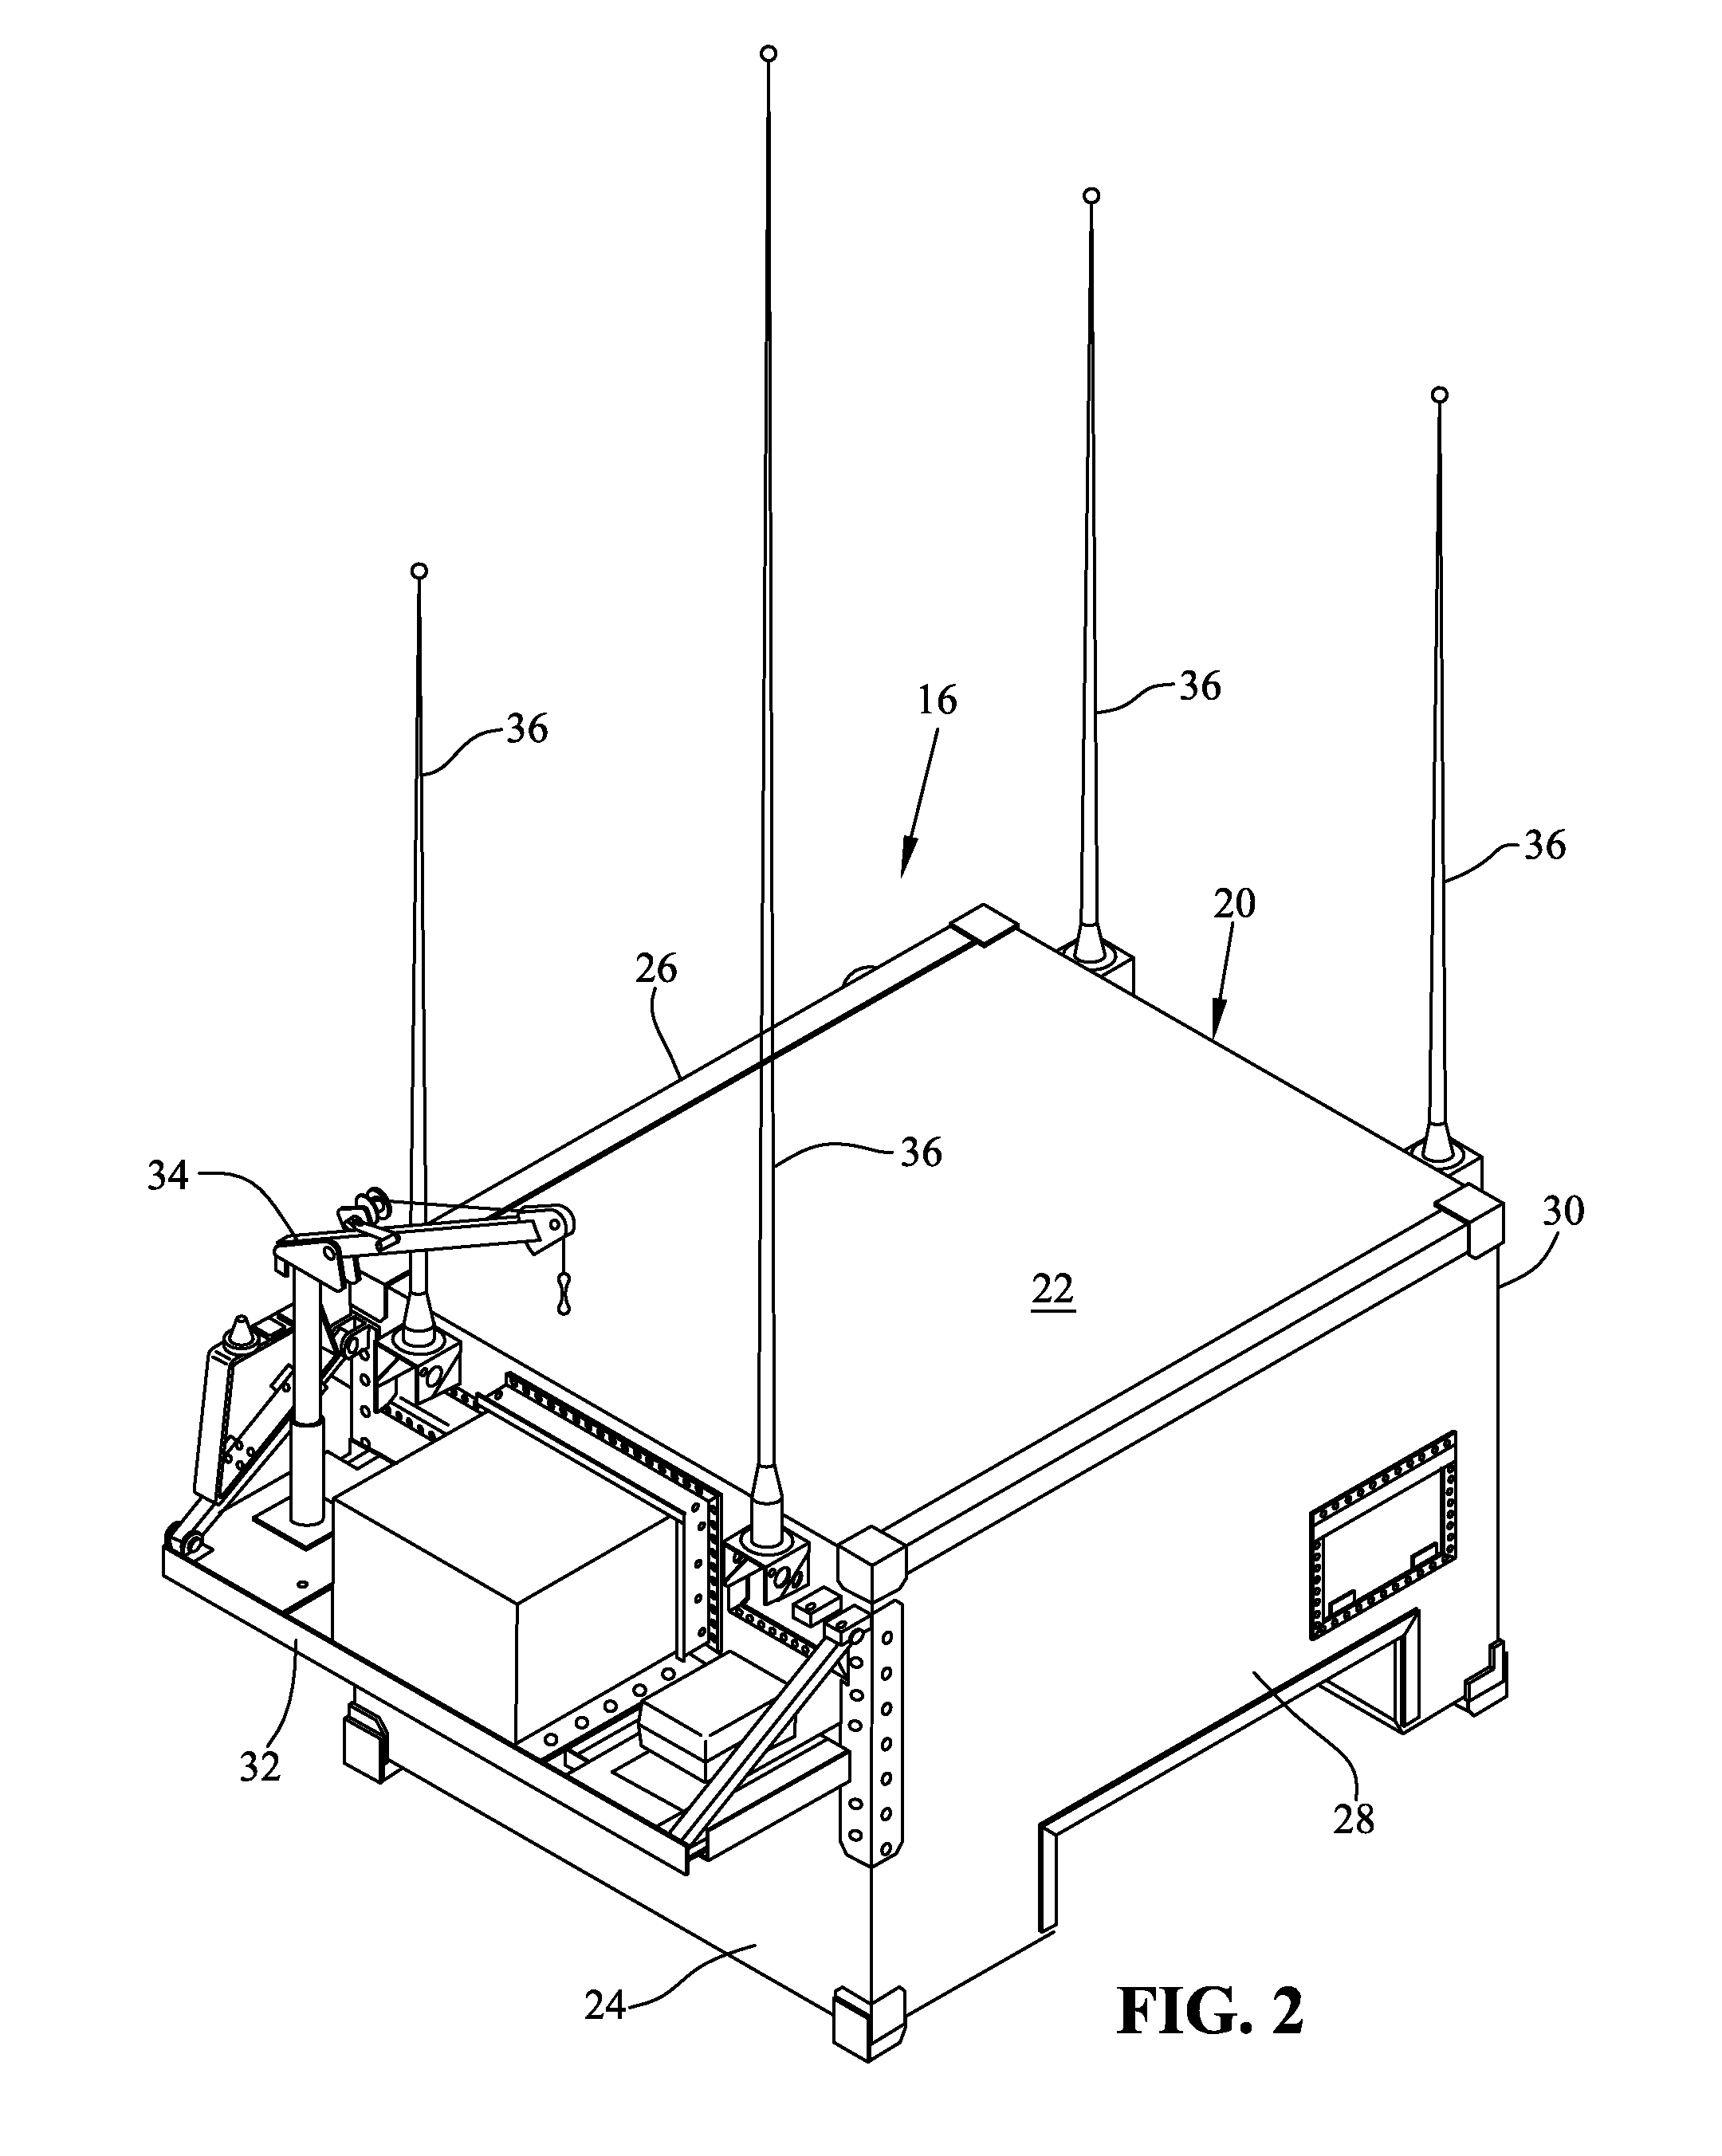 Vehicle and mast mounting assembly therefor